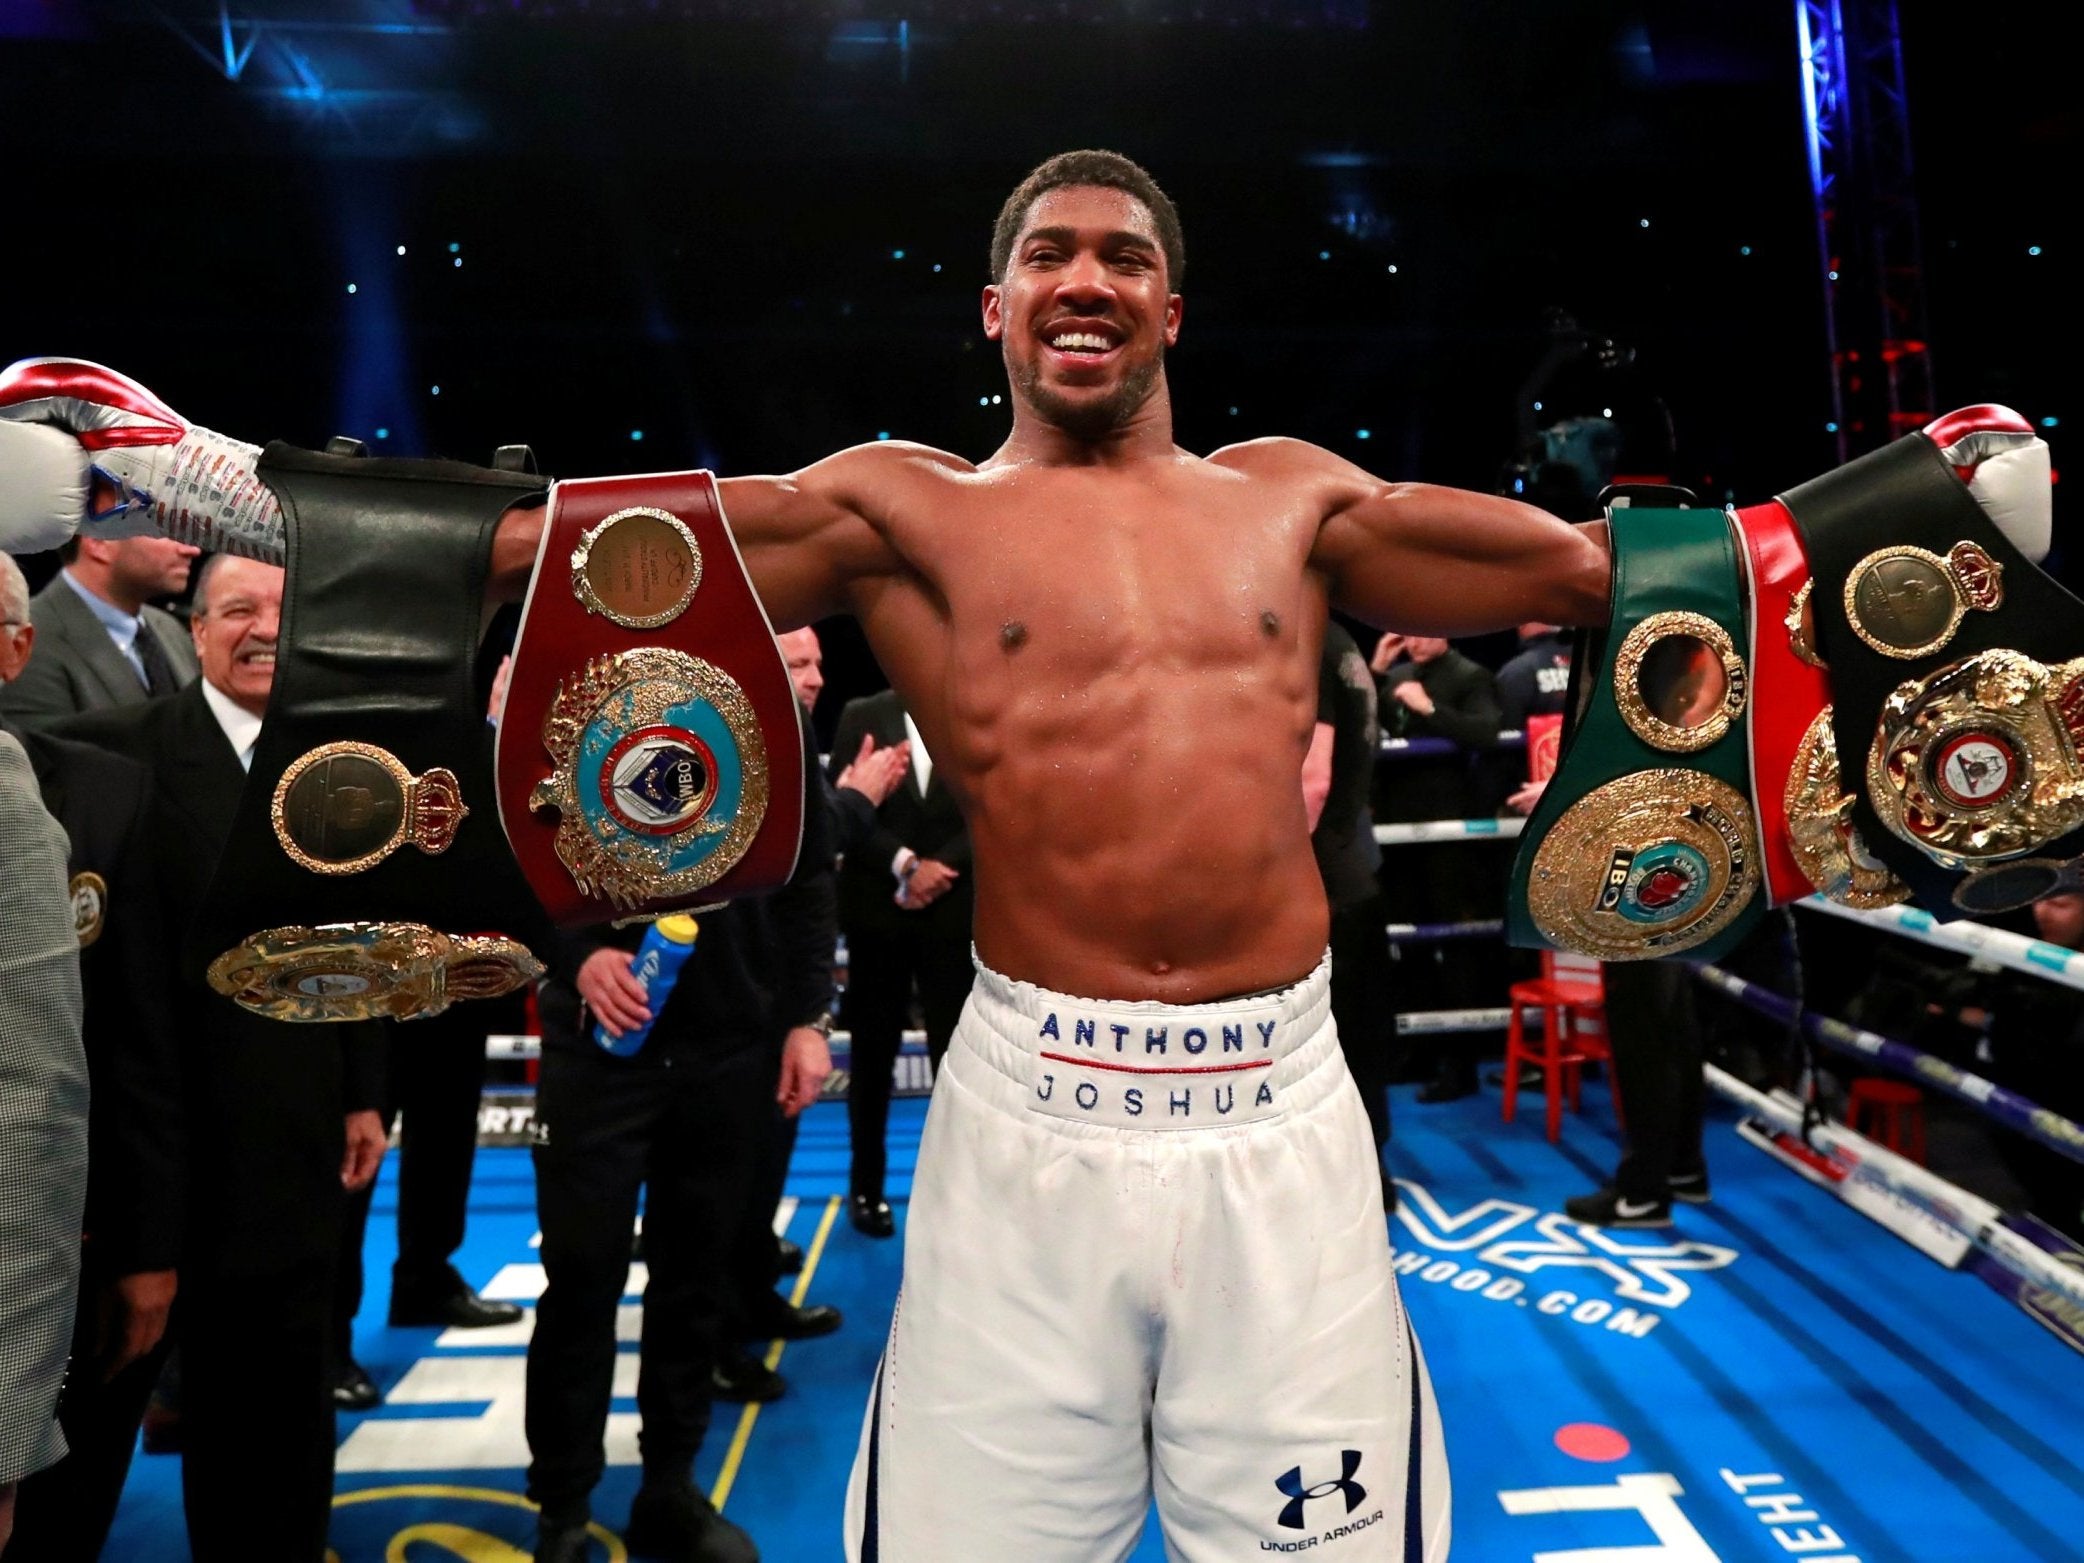 Anthony Joshua is the current IBF, WBO and IBO champion